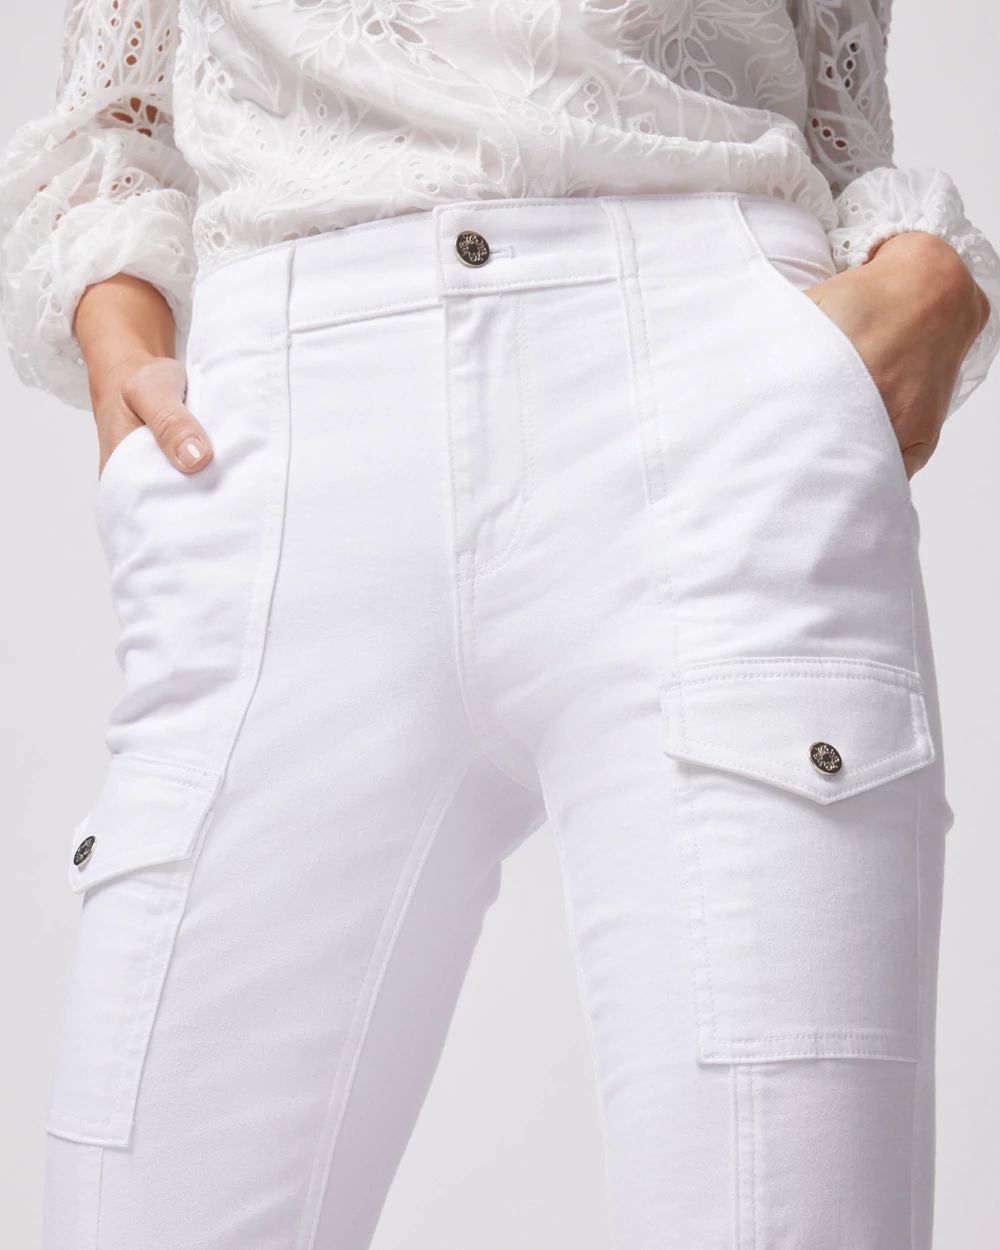 Petite High-Rise Cargo Skinny Flare Jeans click to view larger image.